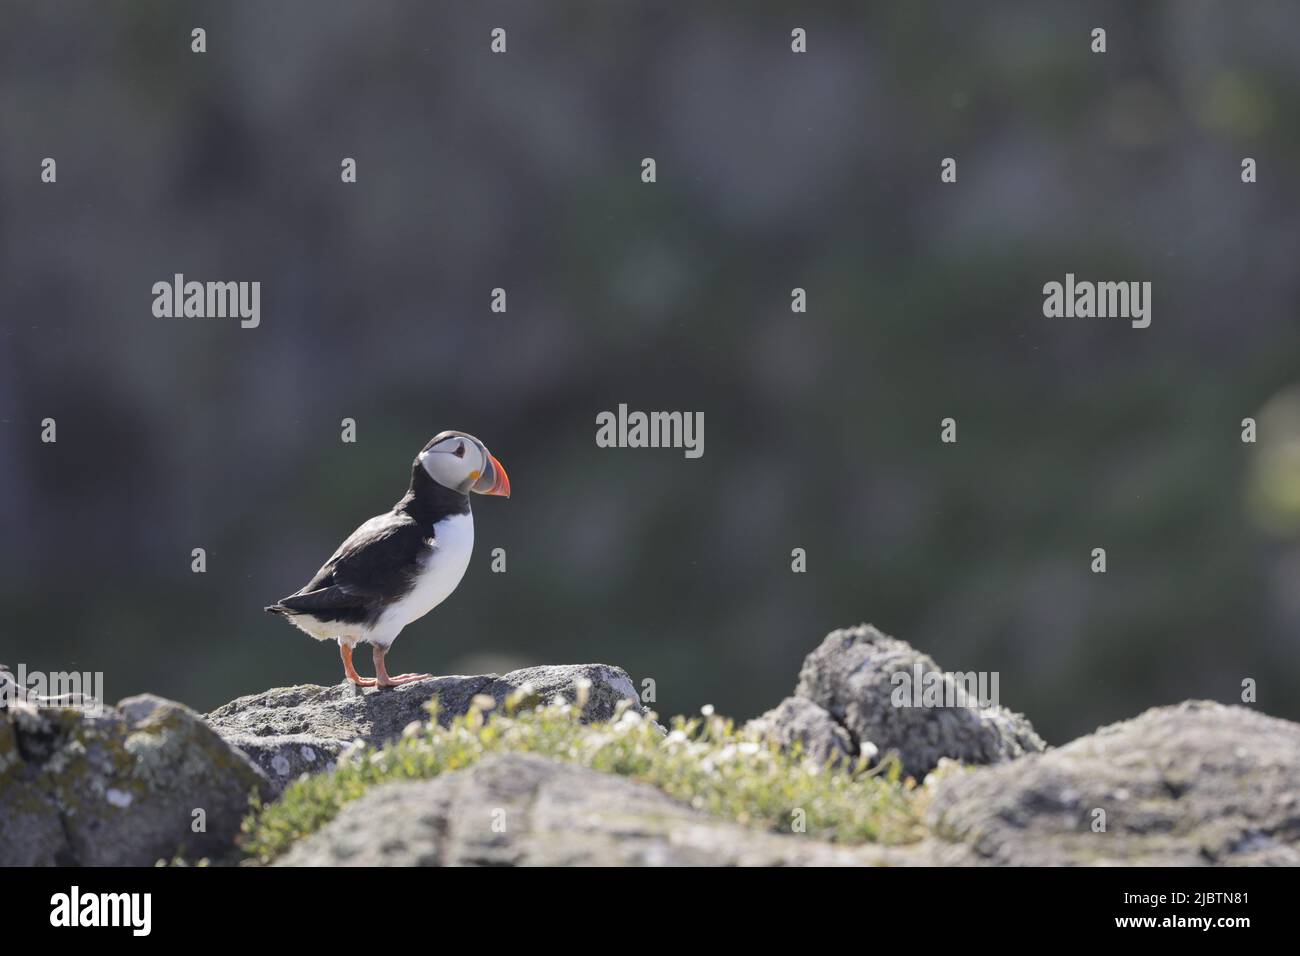 Puffin backlit Stock Photo